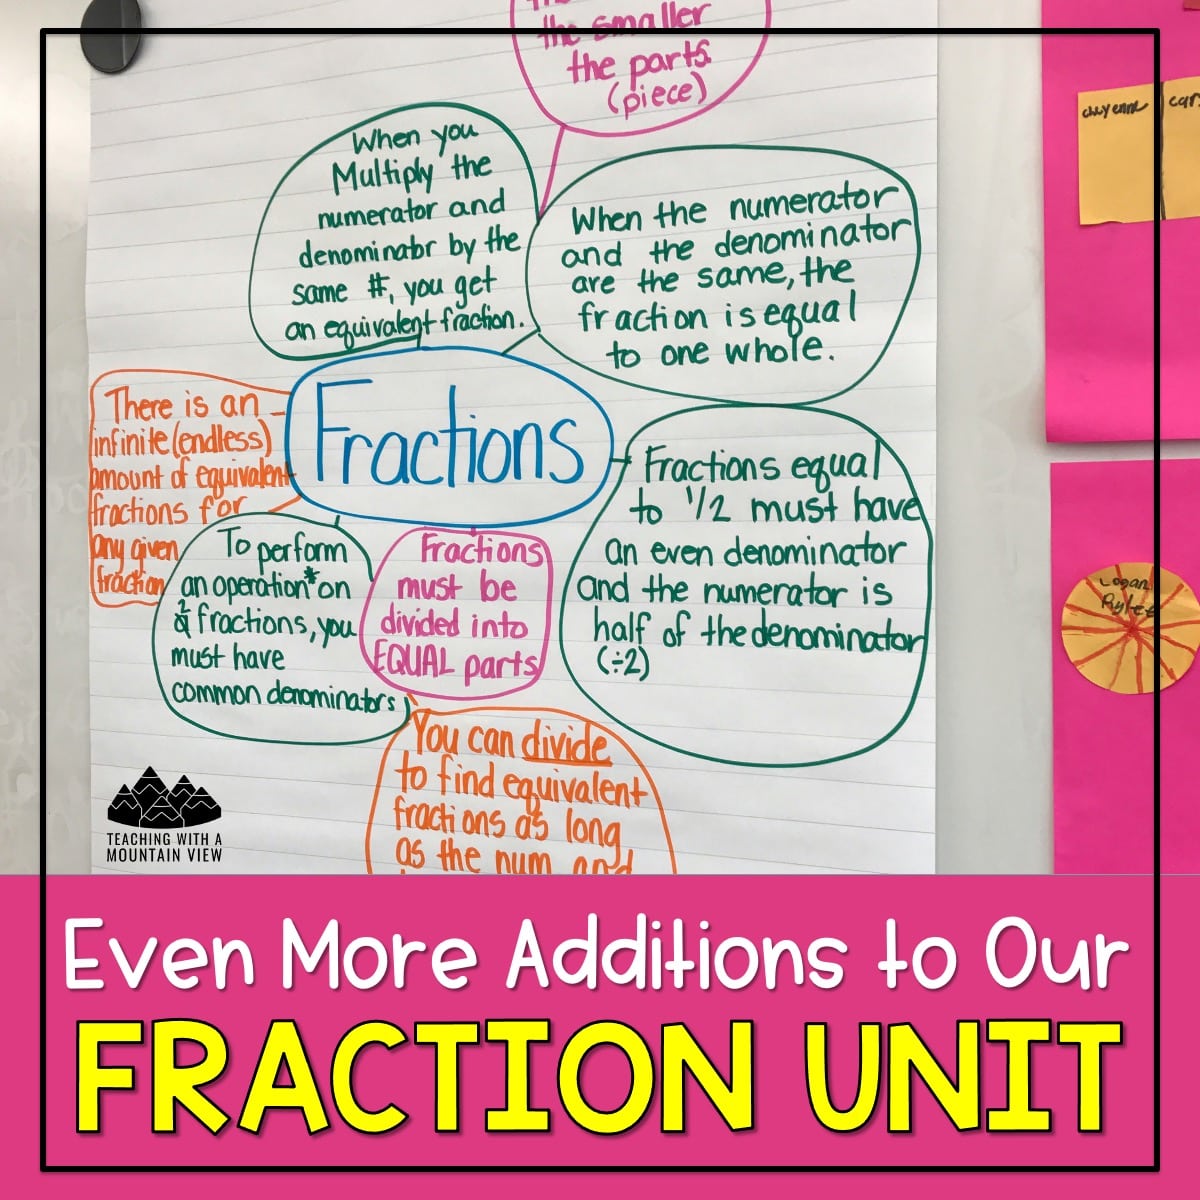 Upper elementary fraction unit activities for hands-on learning. Includes practice activities, exit tickets, math projects, and more!